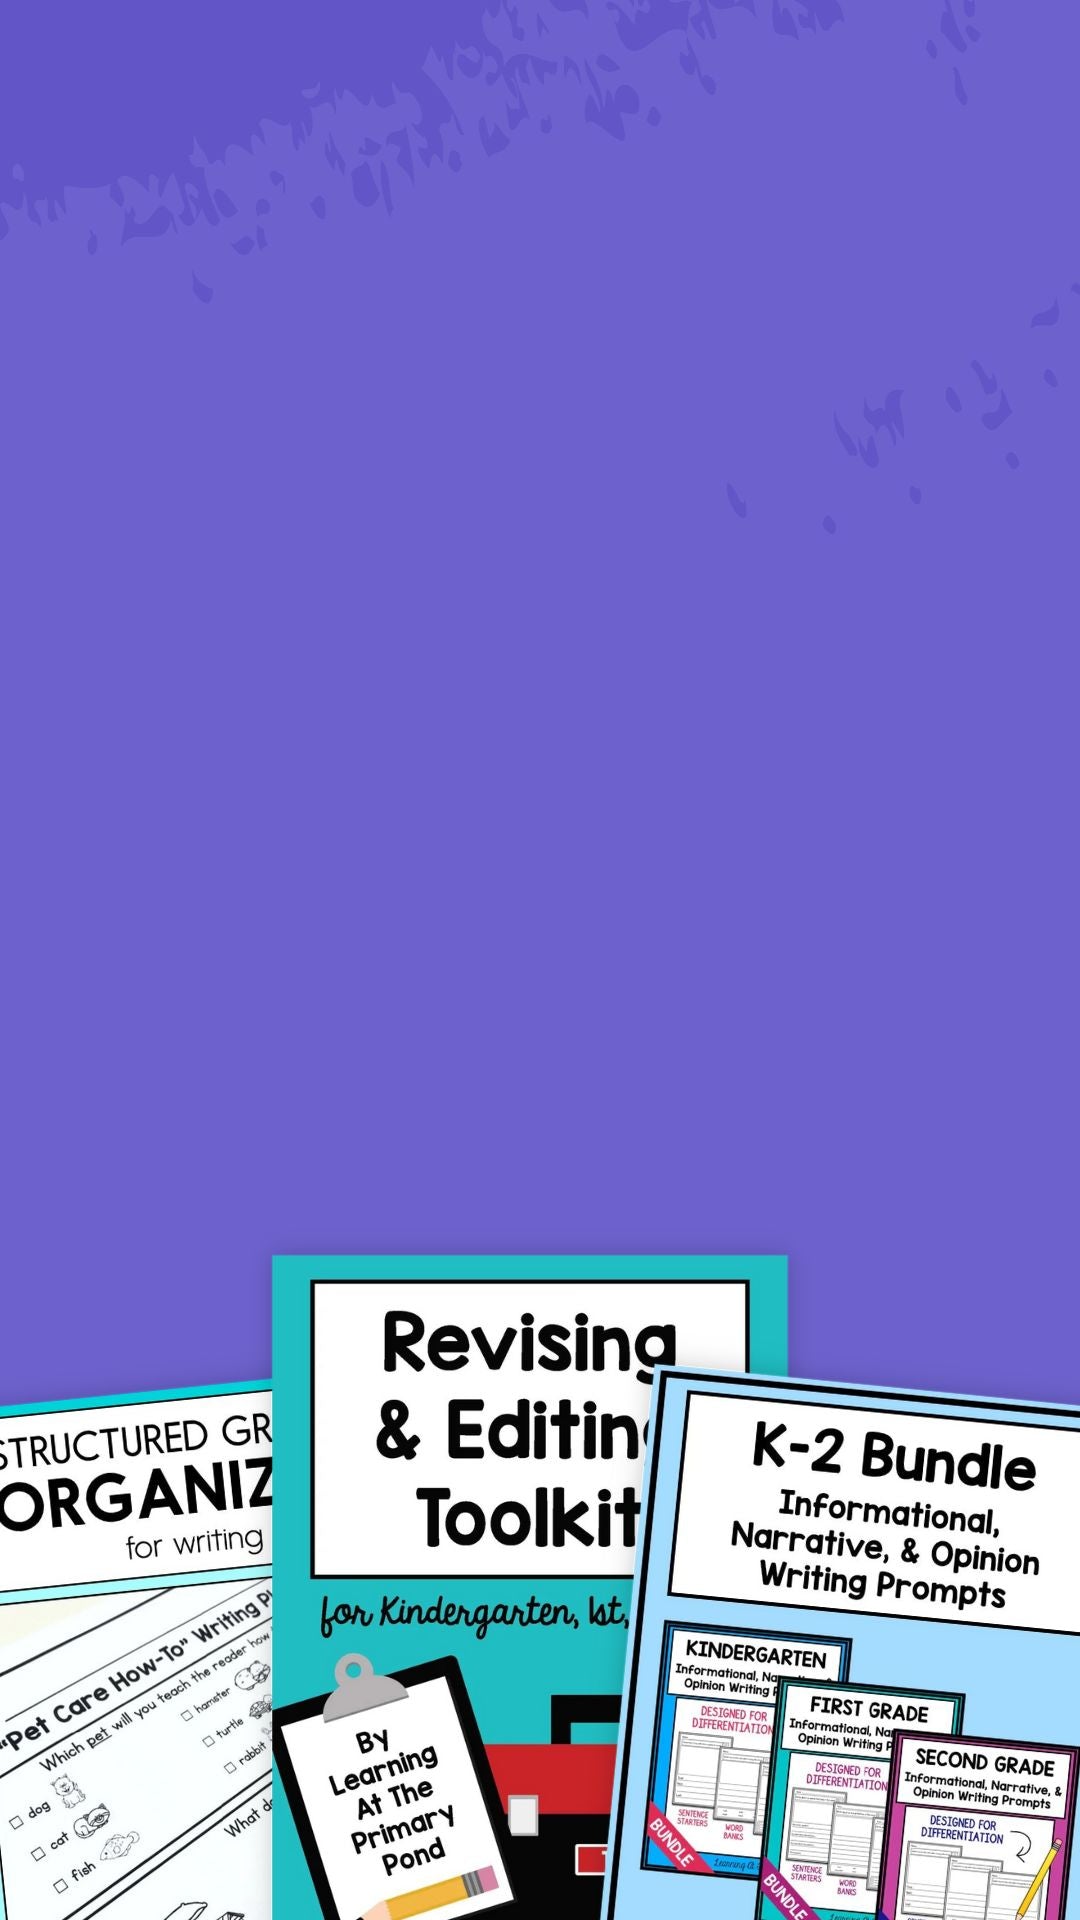 Check out our favorite writing resources!